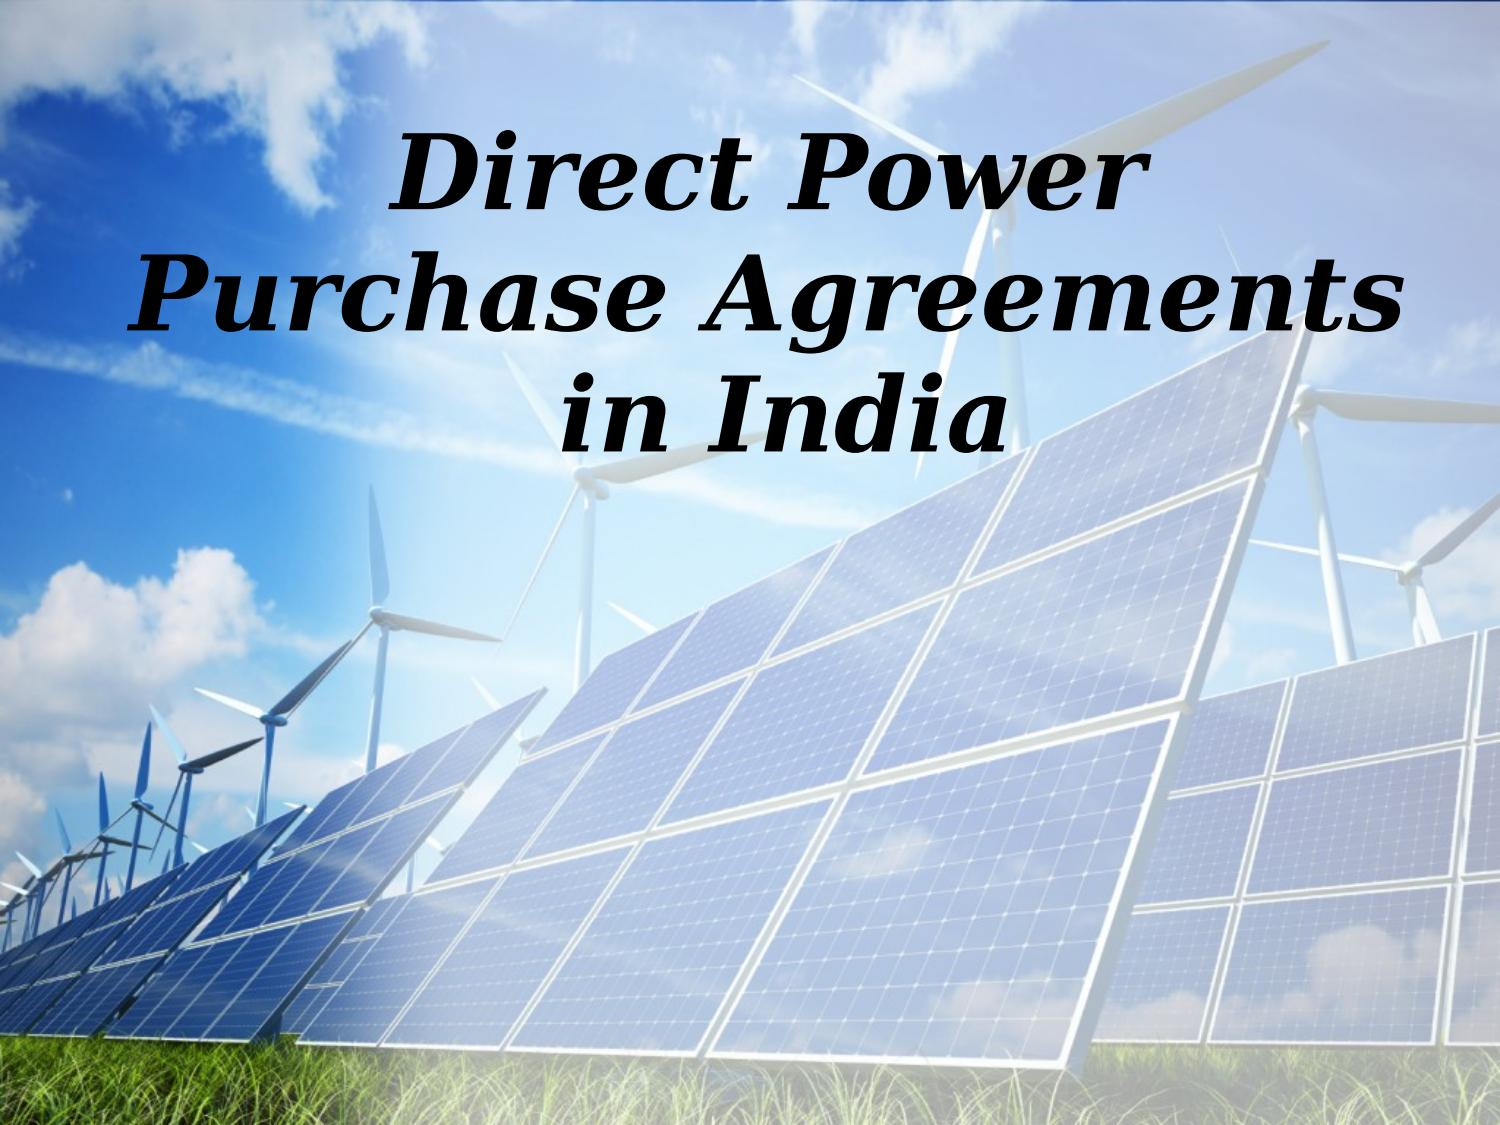 Power Purchase Agreement India Direct Power Purchase Agreements In India Sophia Jones Issuu